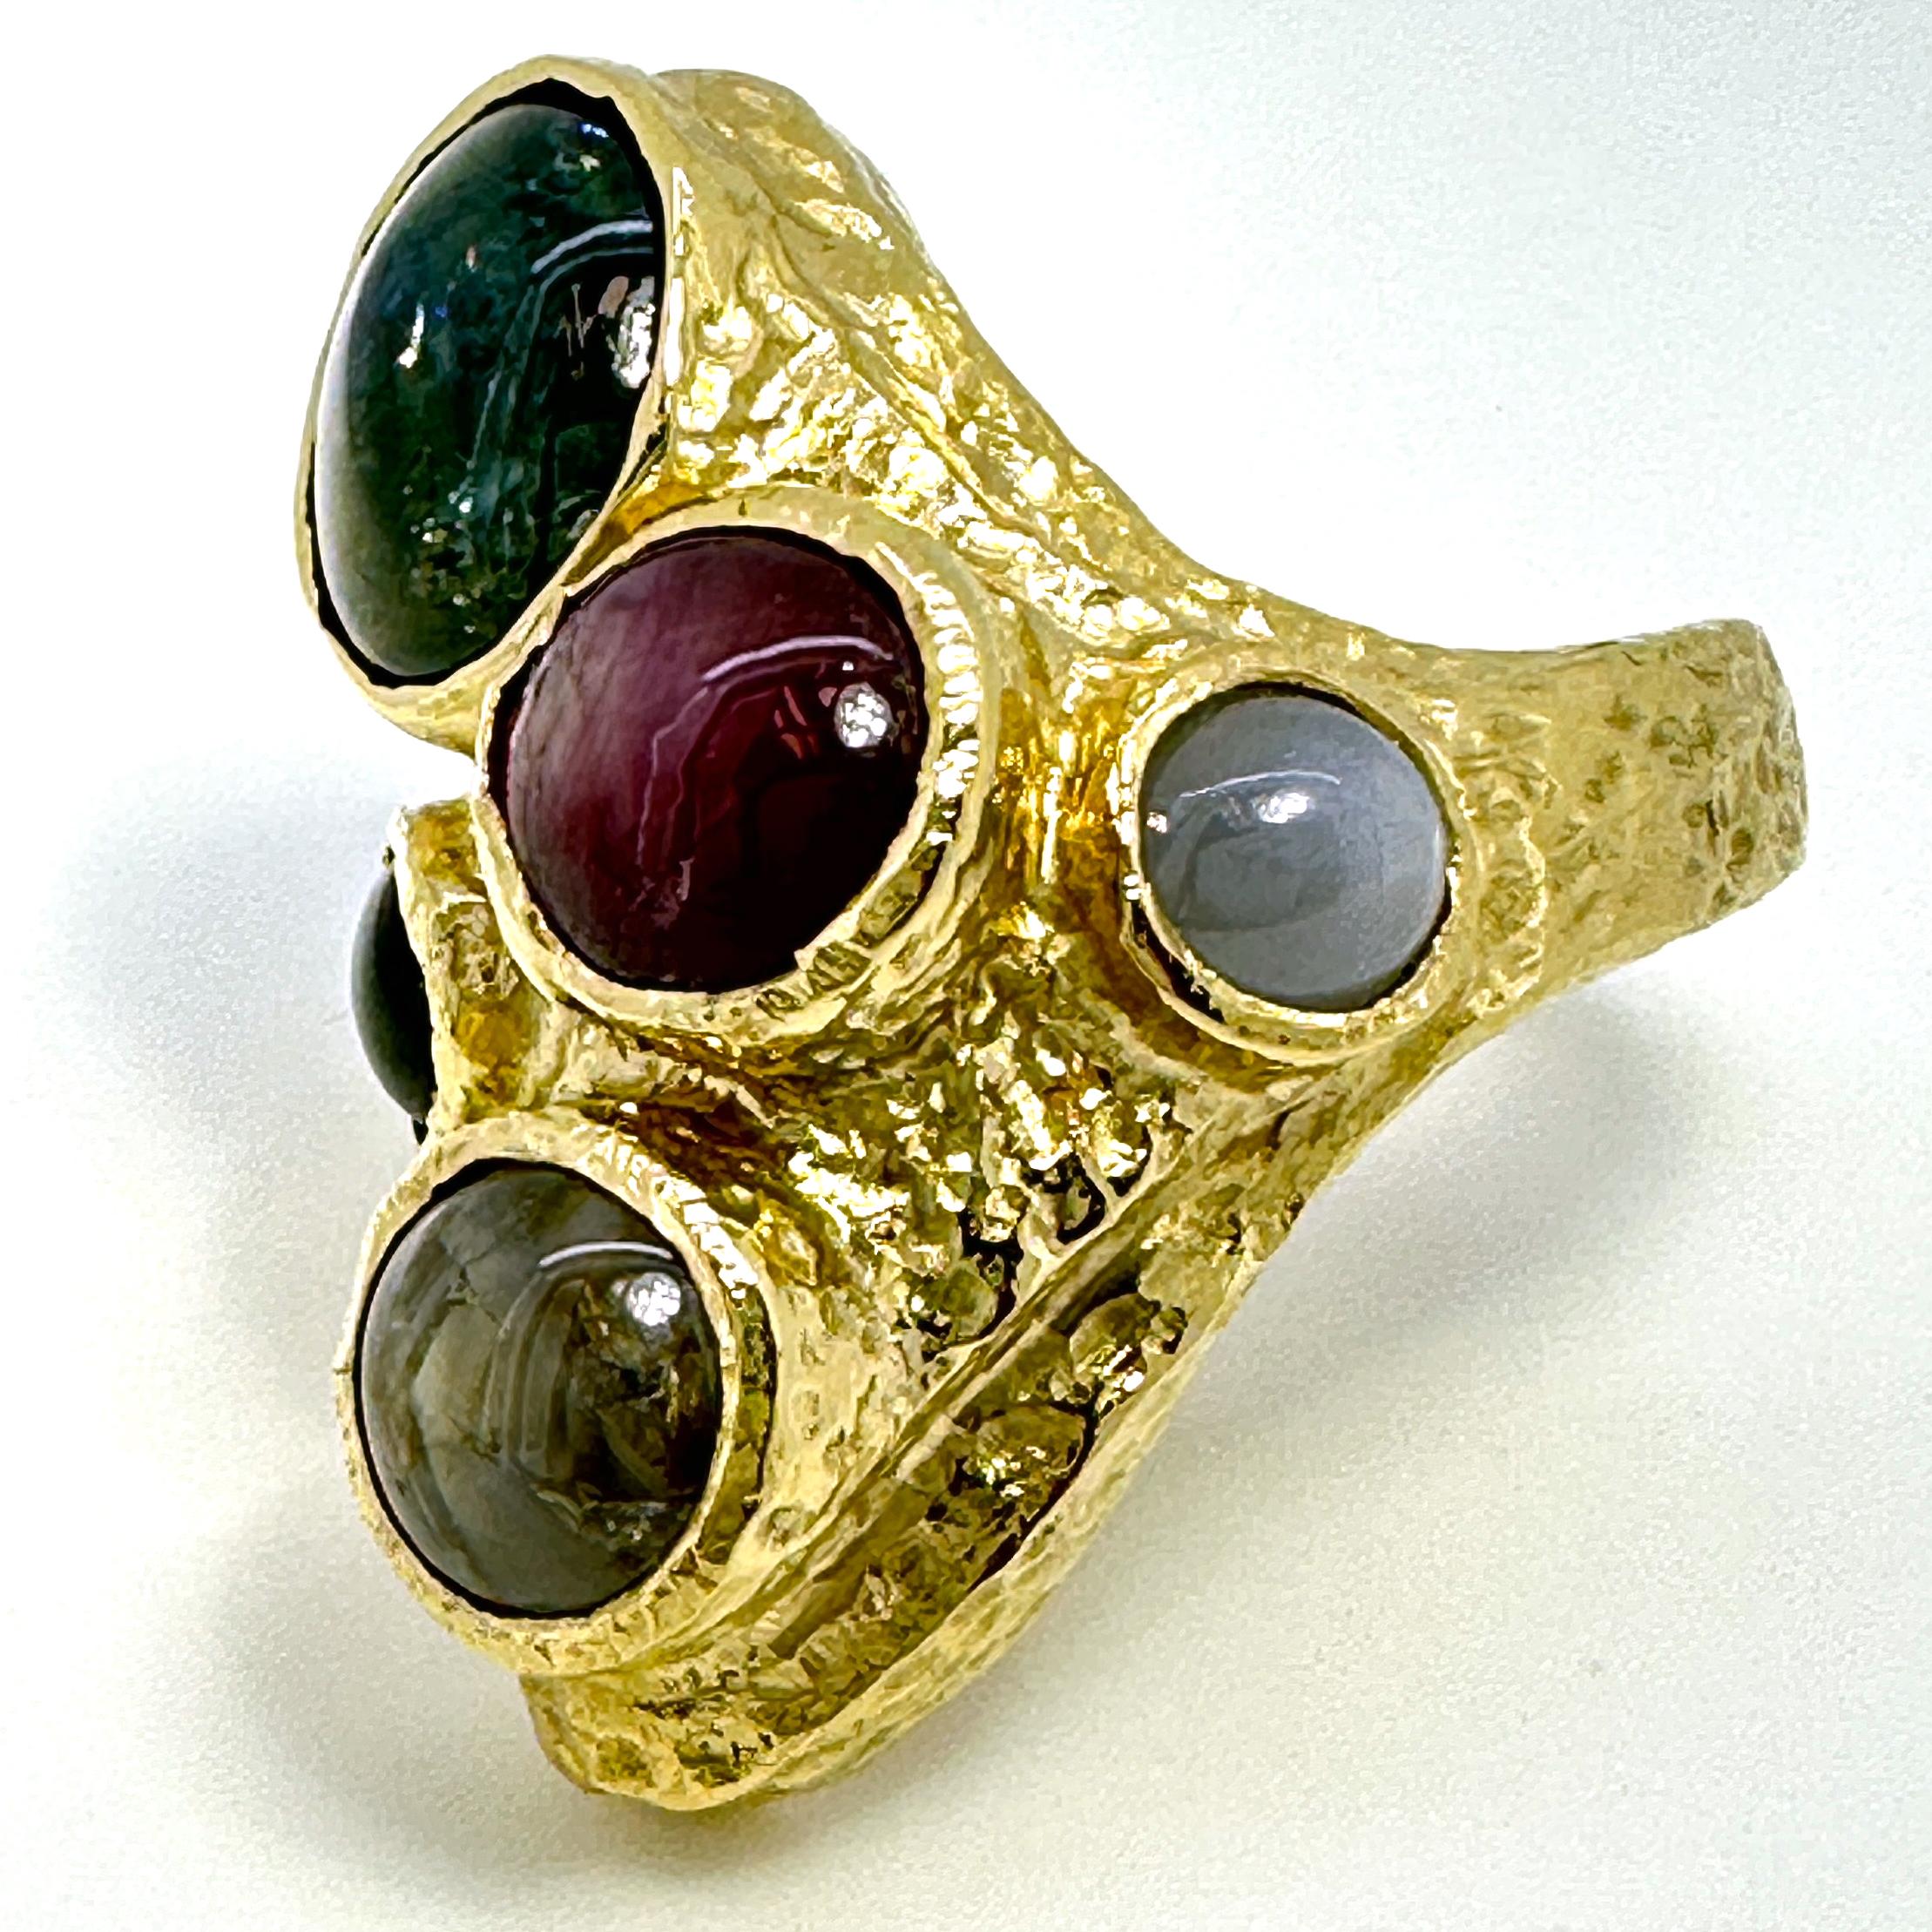 This one-of-a-kind ring by Eytan Brandes features five natural sapphire and ruby cabochons, each with interesting color and light characteristics.

The magenta-colored stone is a 2.94 carat star ruby from Madagascar.  In the right light, it shows a